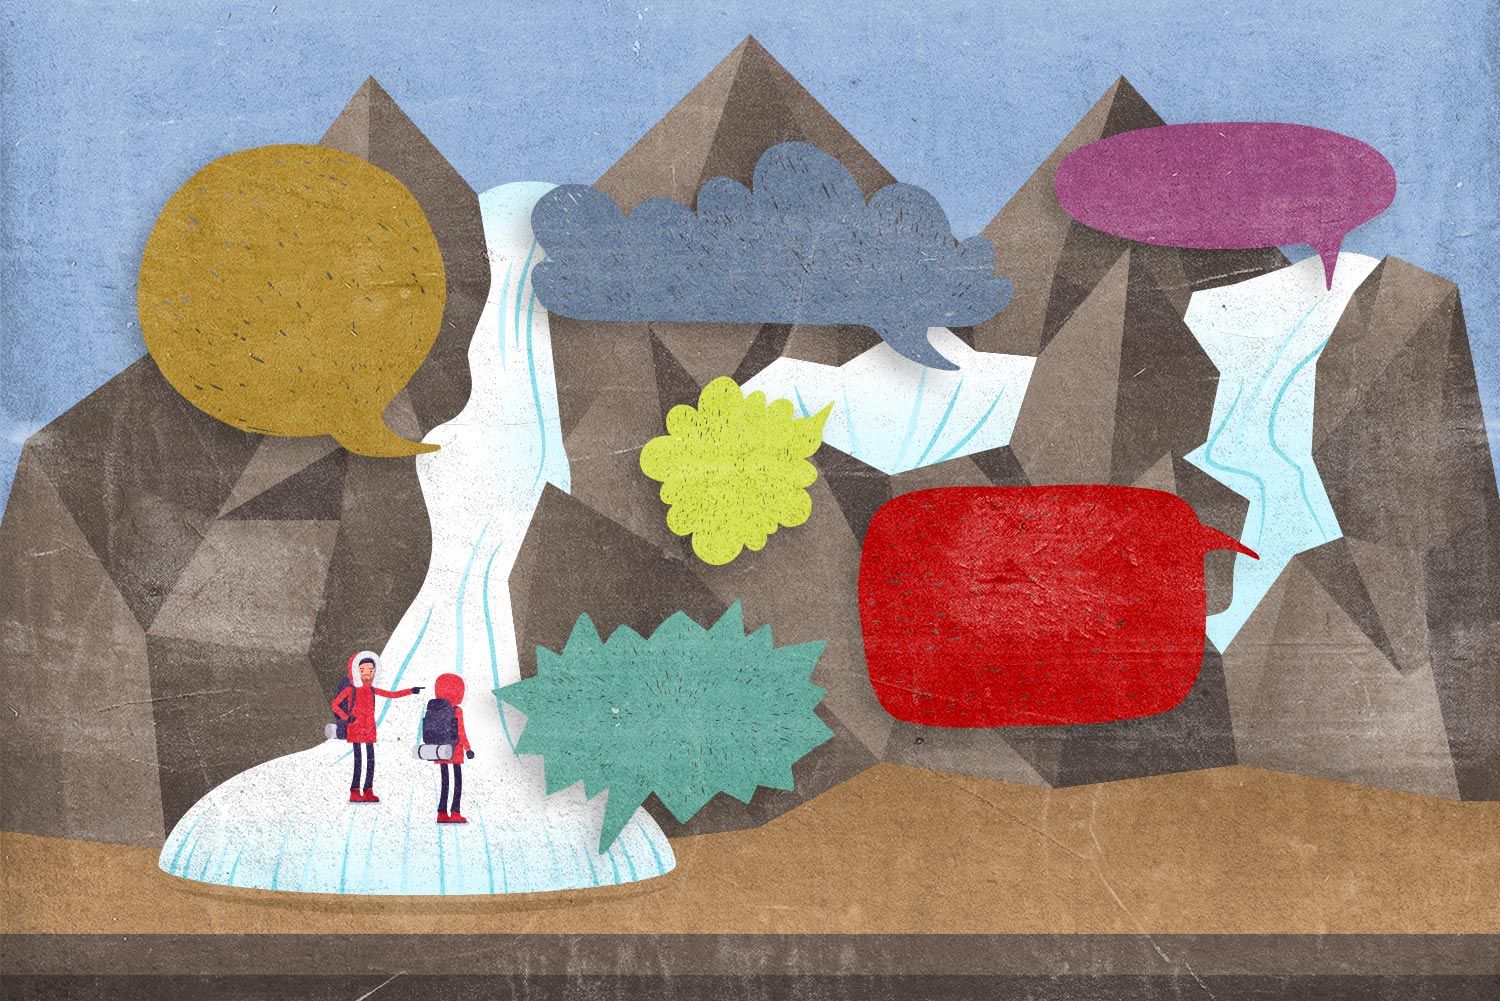 Illustration depicting the gathering of scientific data obtainable thru glacial ice cores